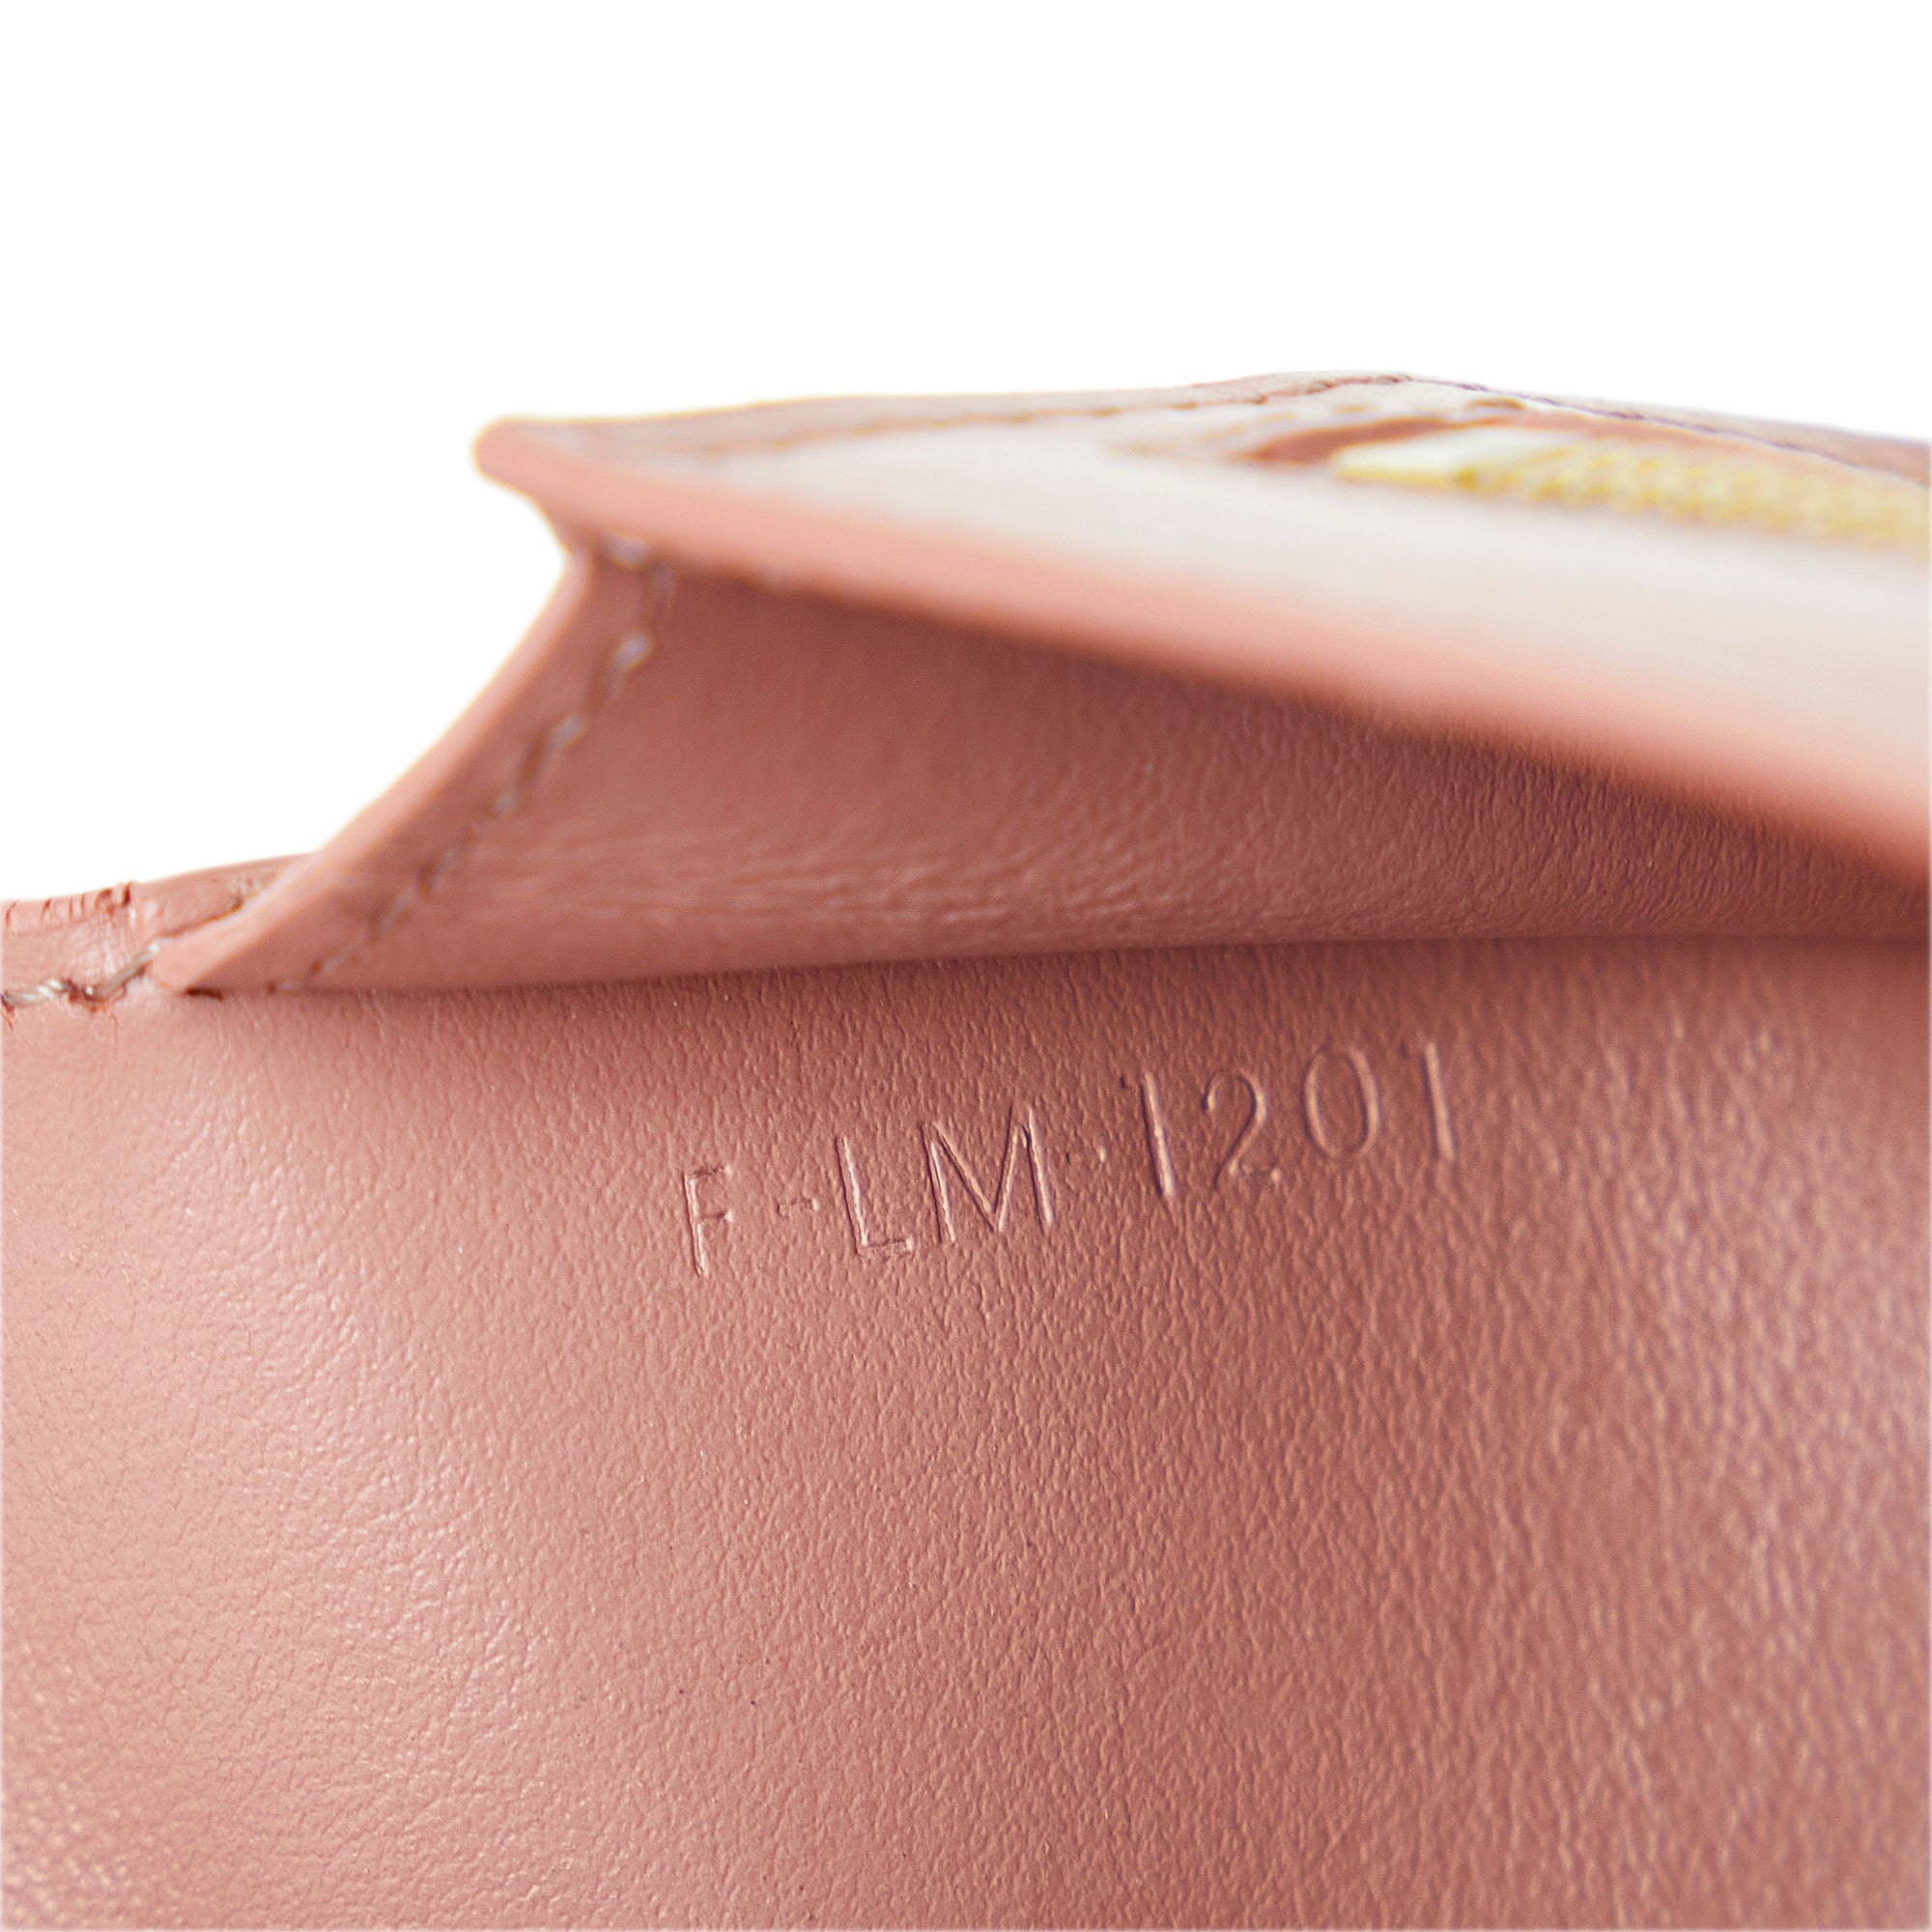 Leather card wallet Celine Pink in Leather - 36177243